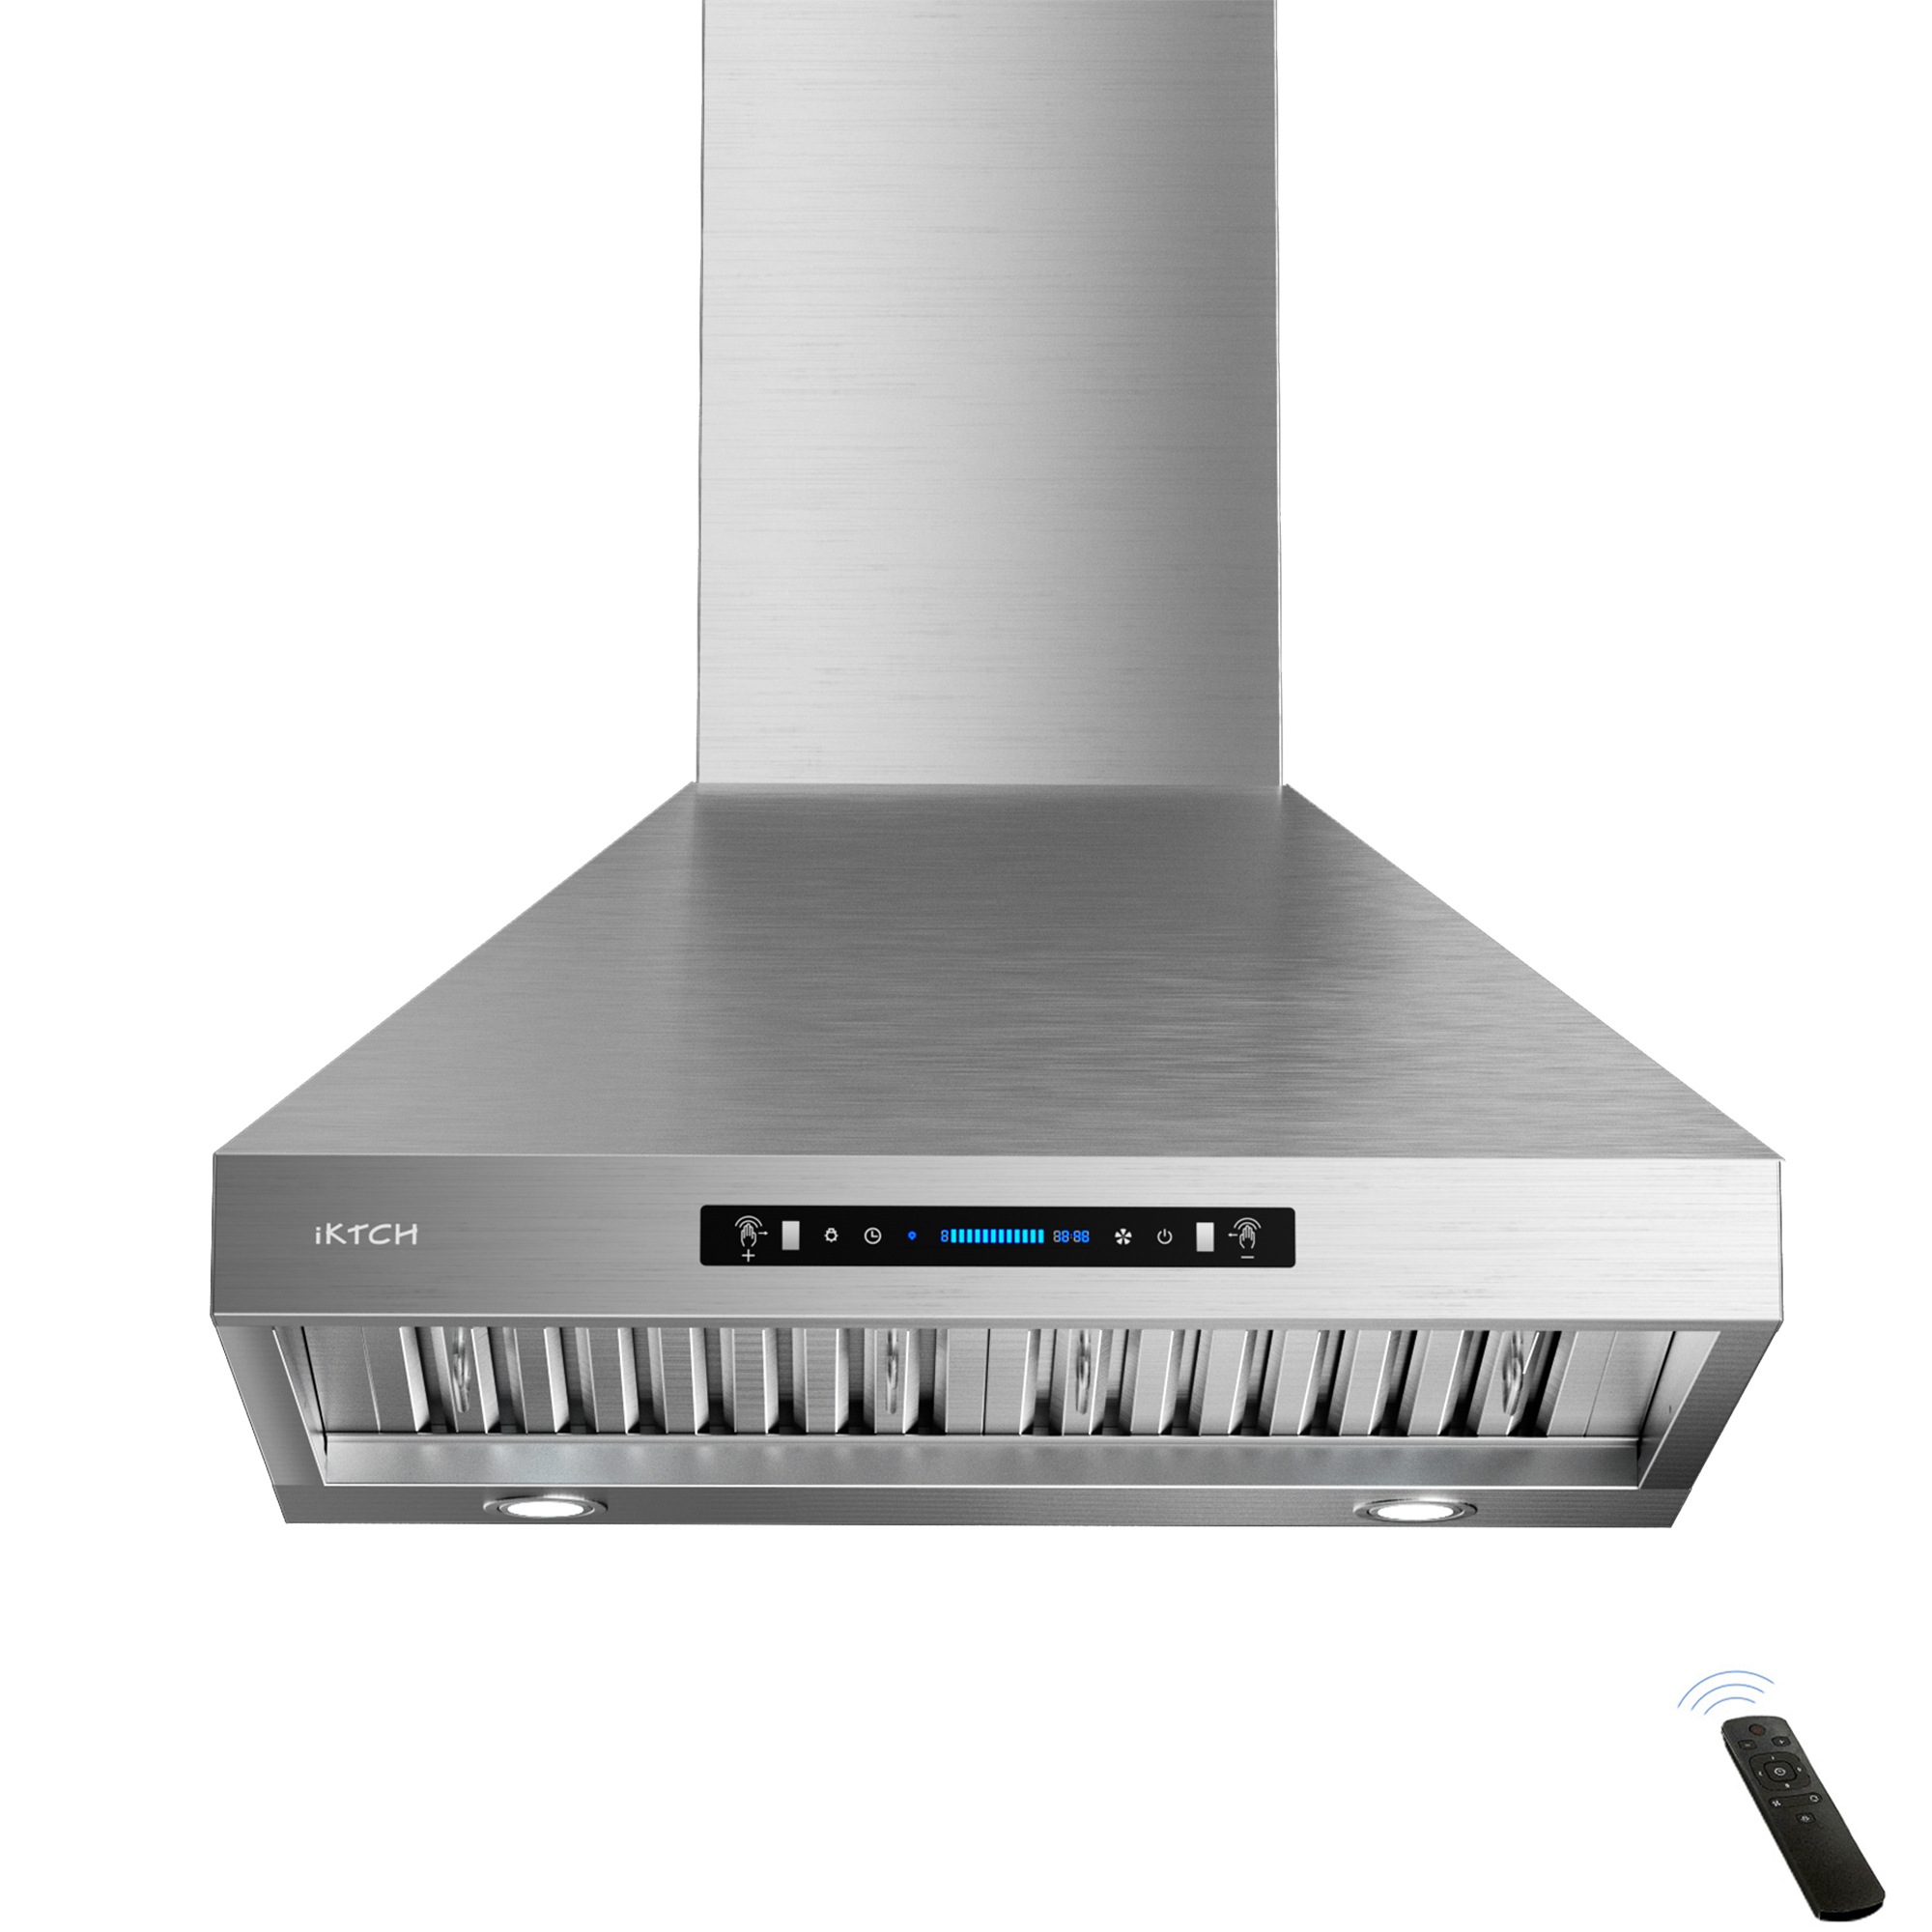 IKTCH 30 inch Vent Wall Mount Range Hood - 900 CFM Efficient Smoke Removal Ultra-Quiet Operation - Silver